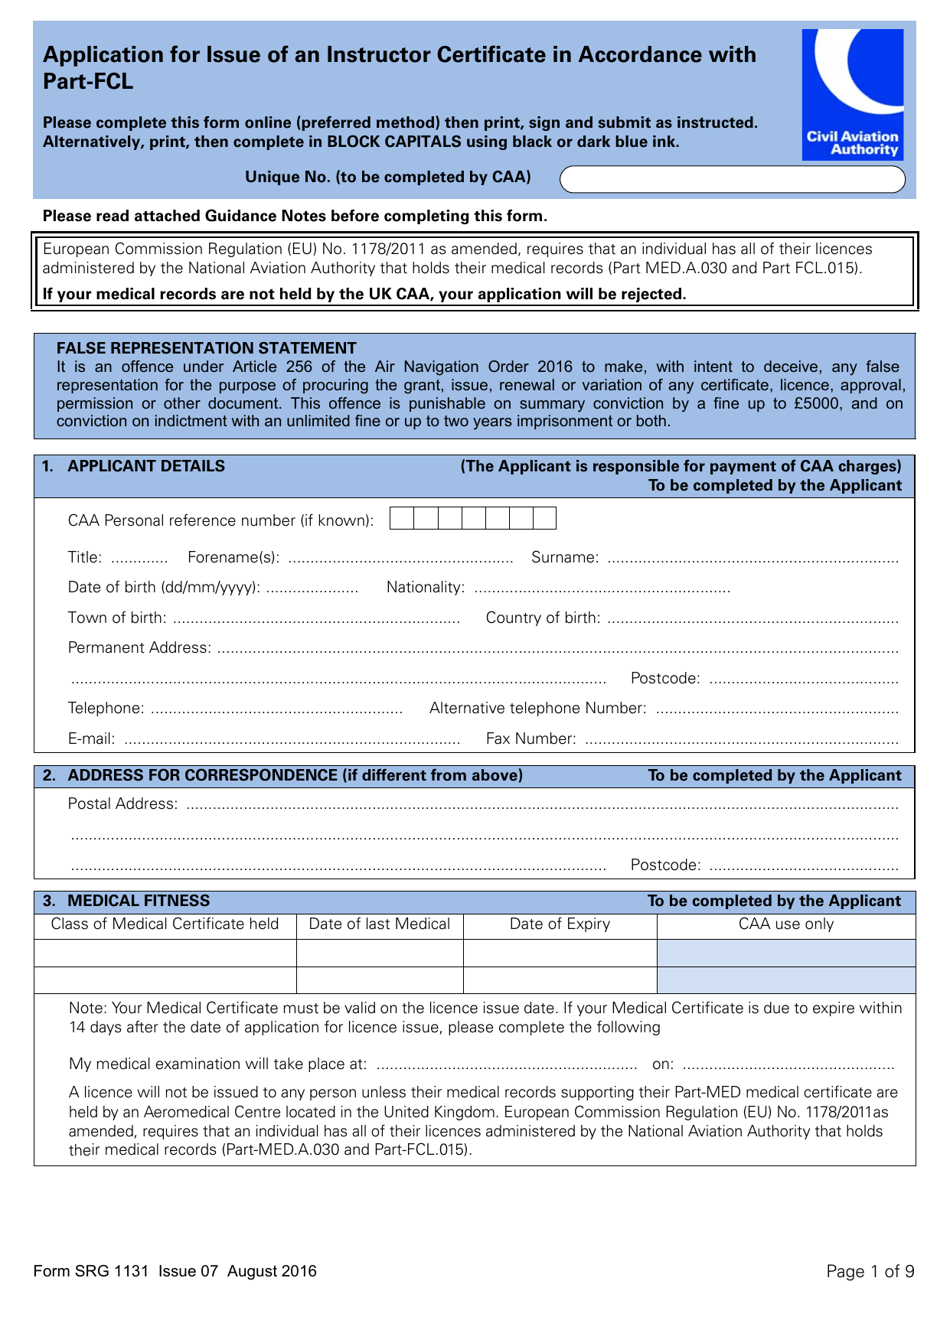 Form SRG1131 Application for Issue of an Instructor Certificate in Accordance With Part-Fcl - United Kingdom, Page 1